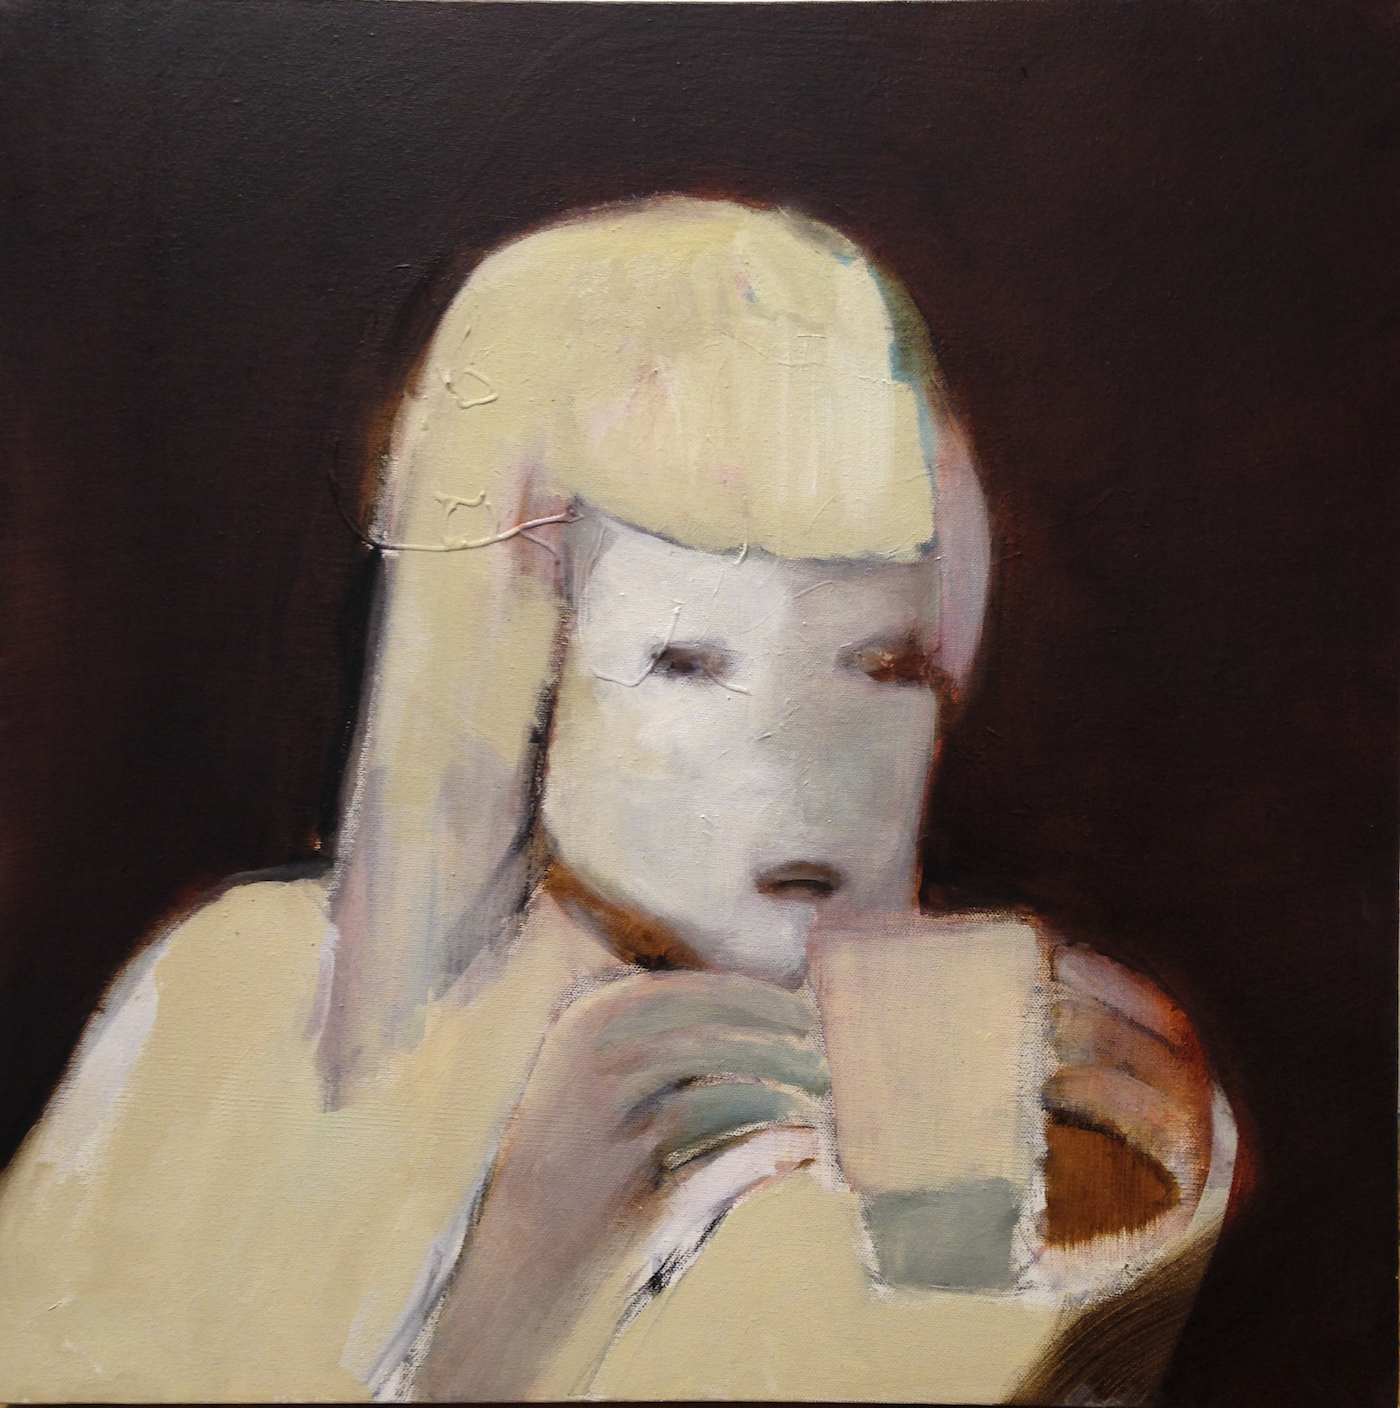 Cup holder_oil paint on canvas_24x24inch_ 2015.jpg